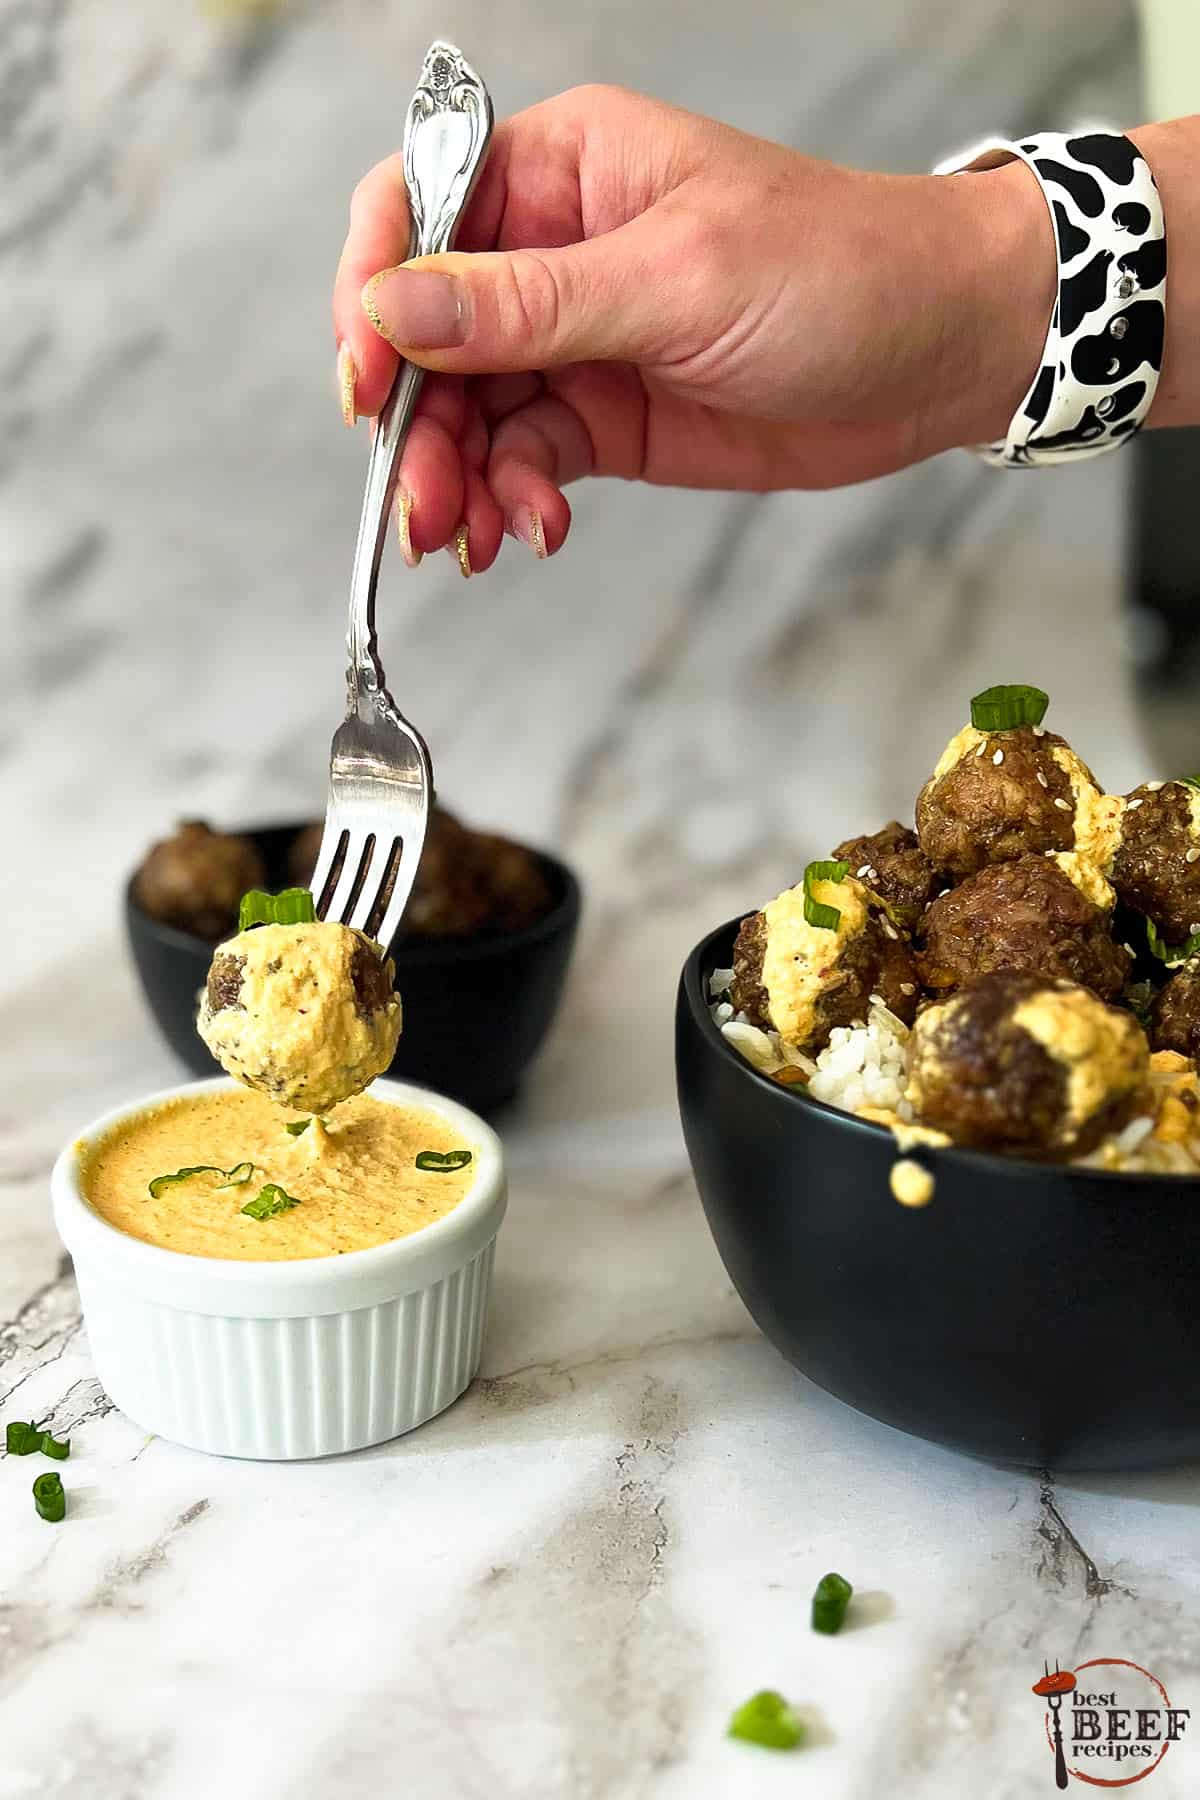 a hand dipping a meatball on a fork into sauce